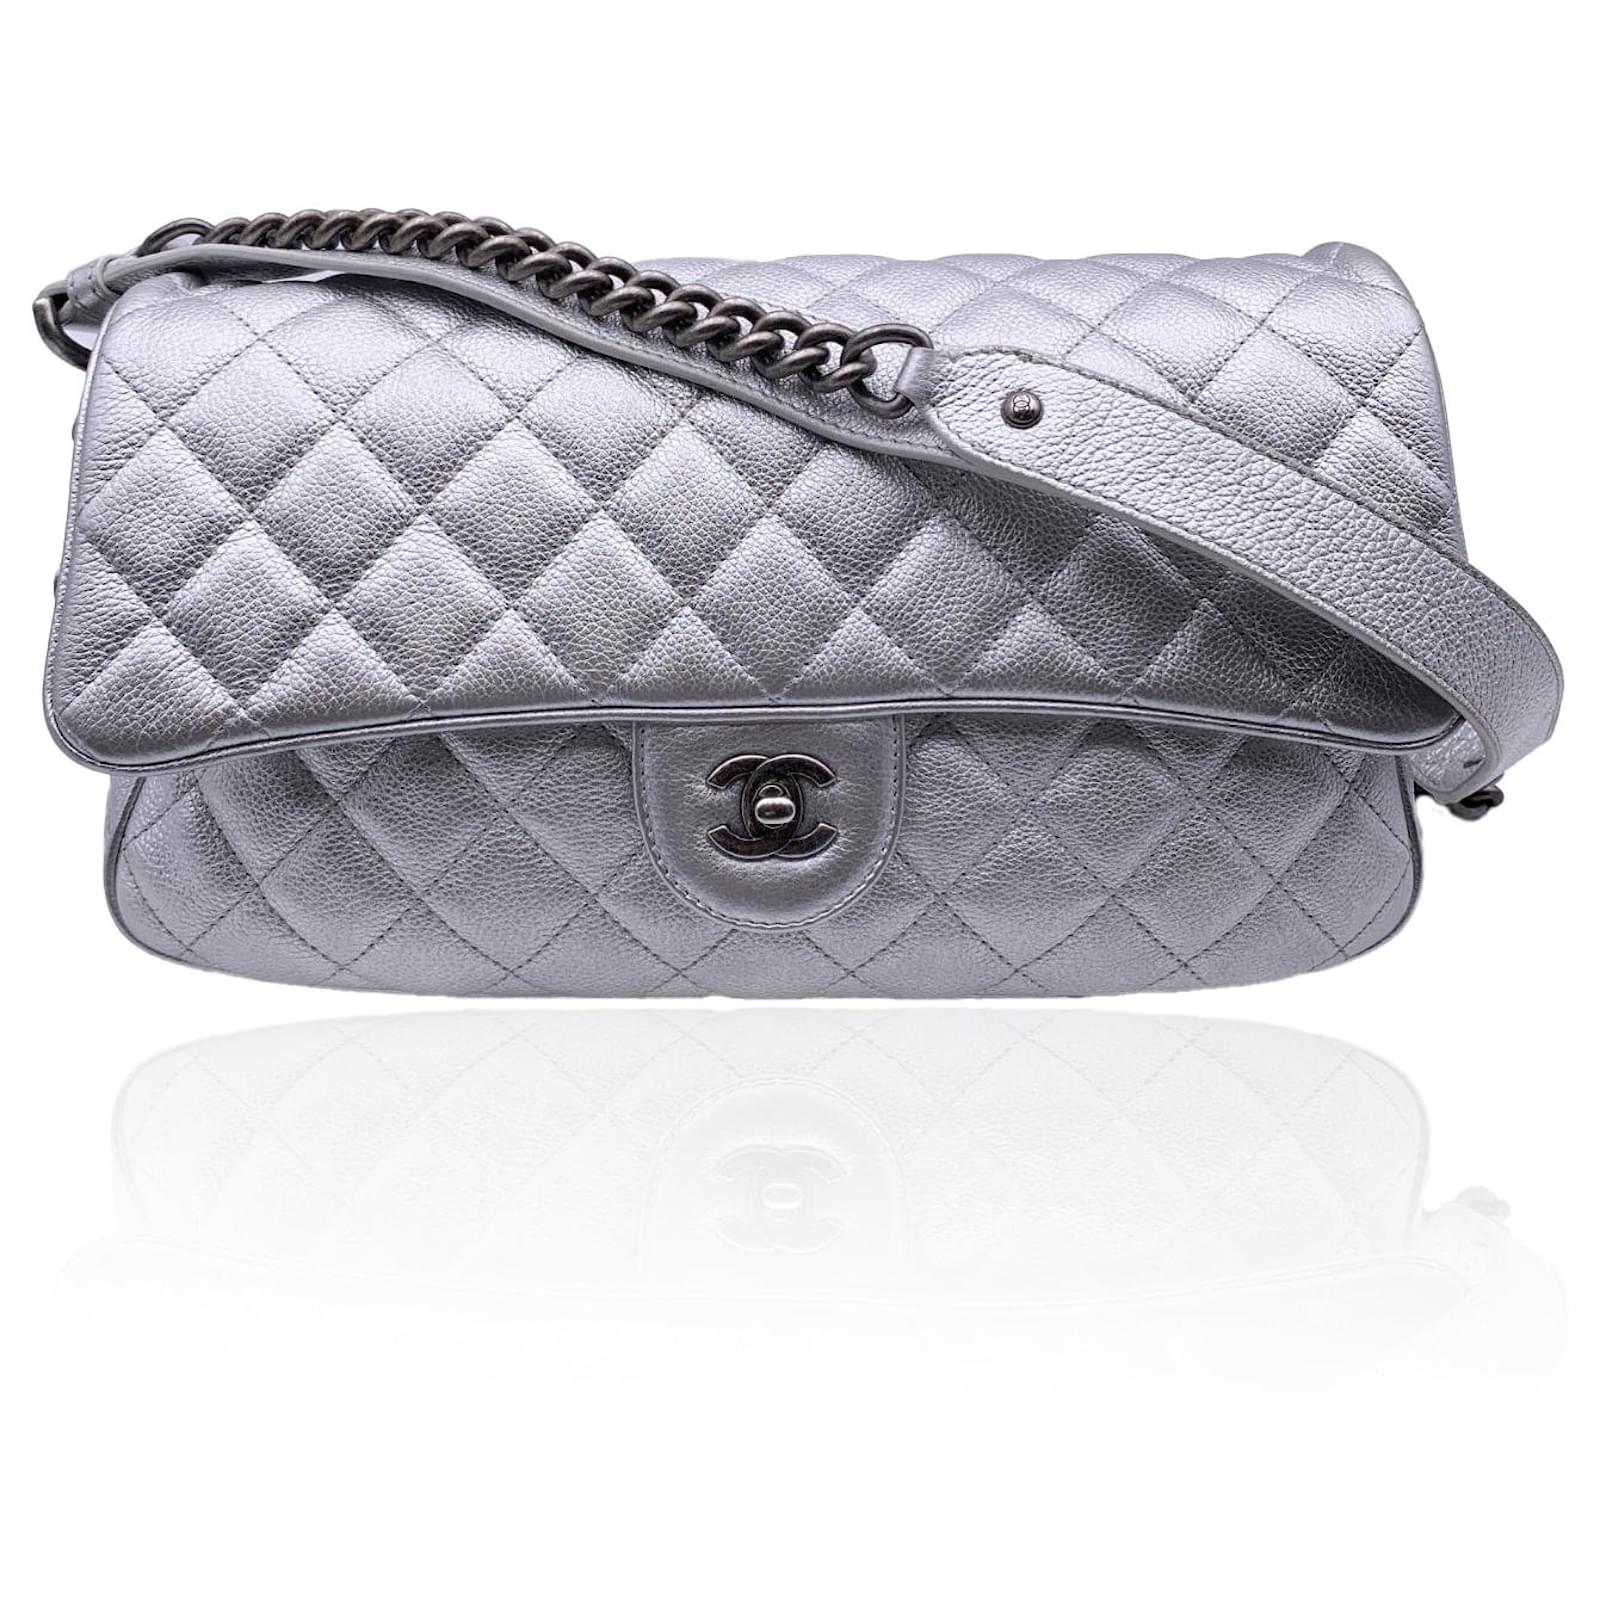 Handbags Chanel Airline 2016 Silver Metal Quilted Leather Easy Flap Shoulder Bag